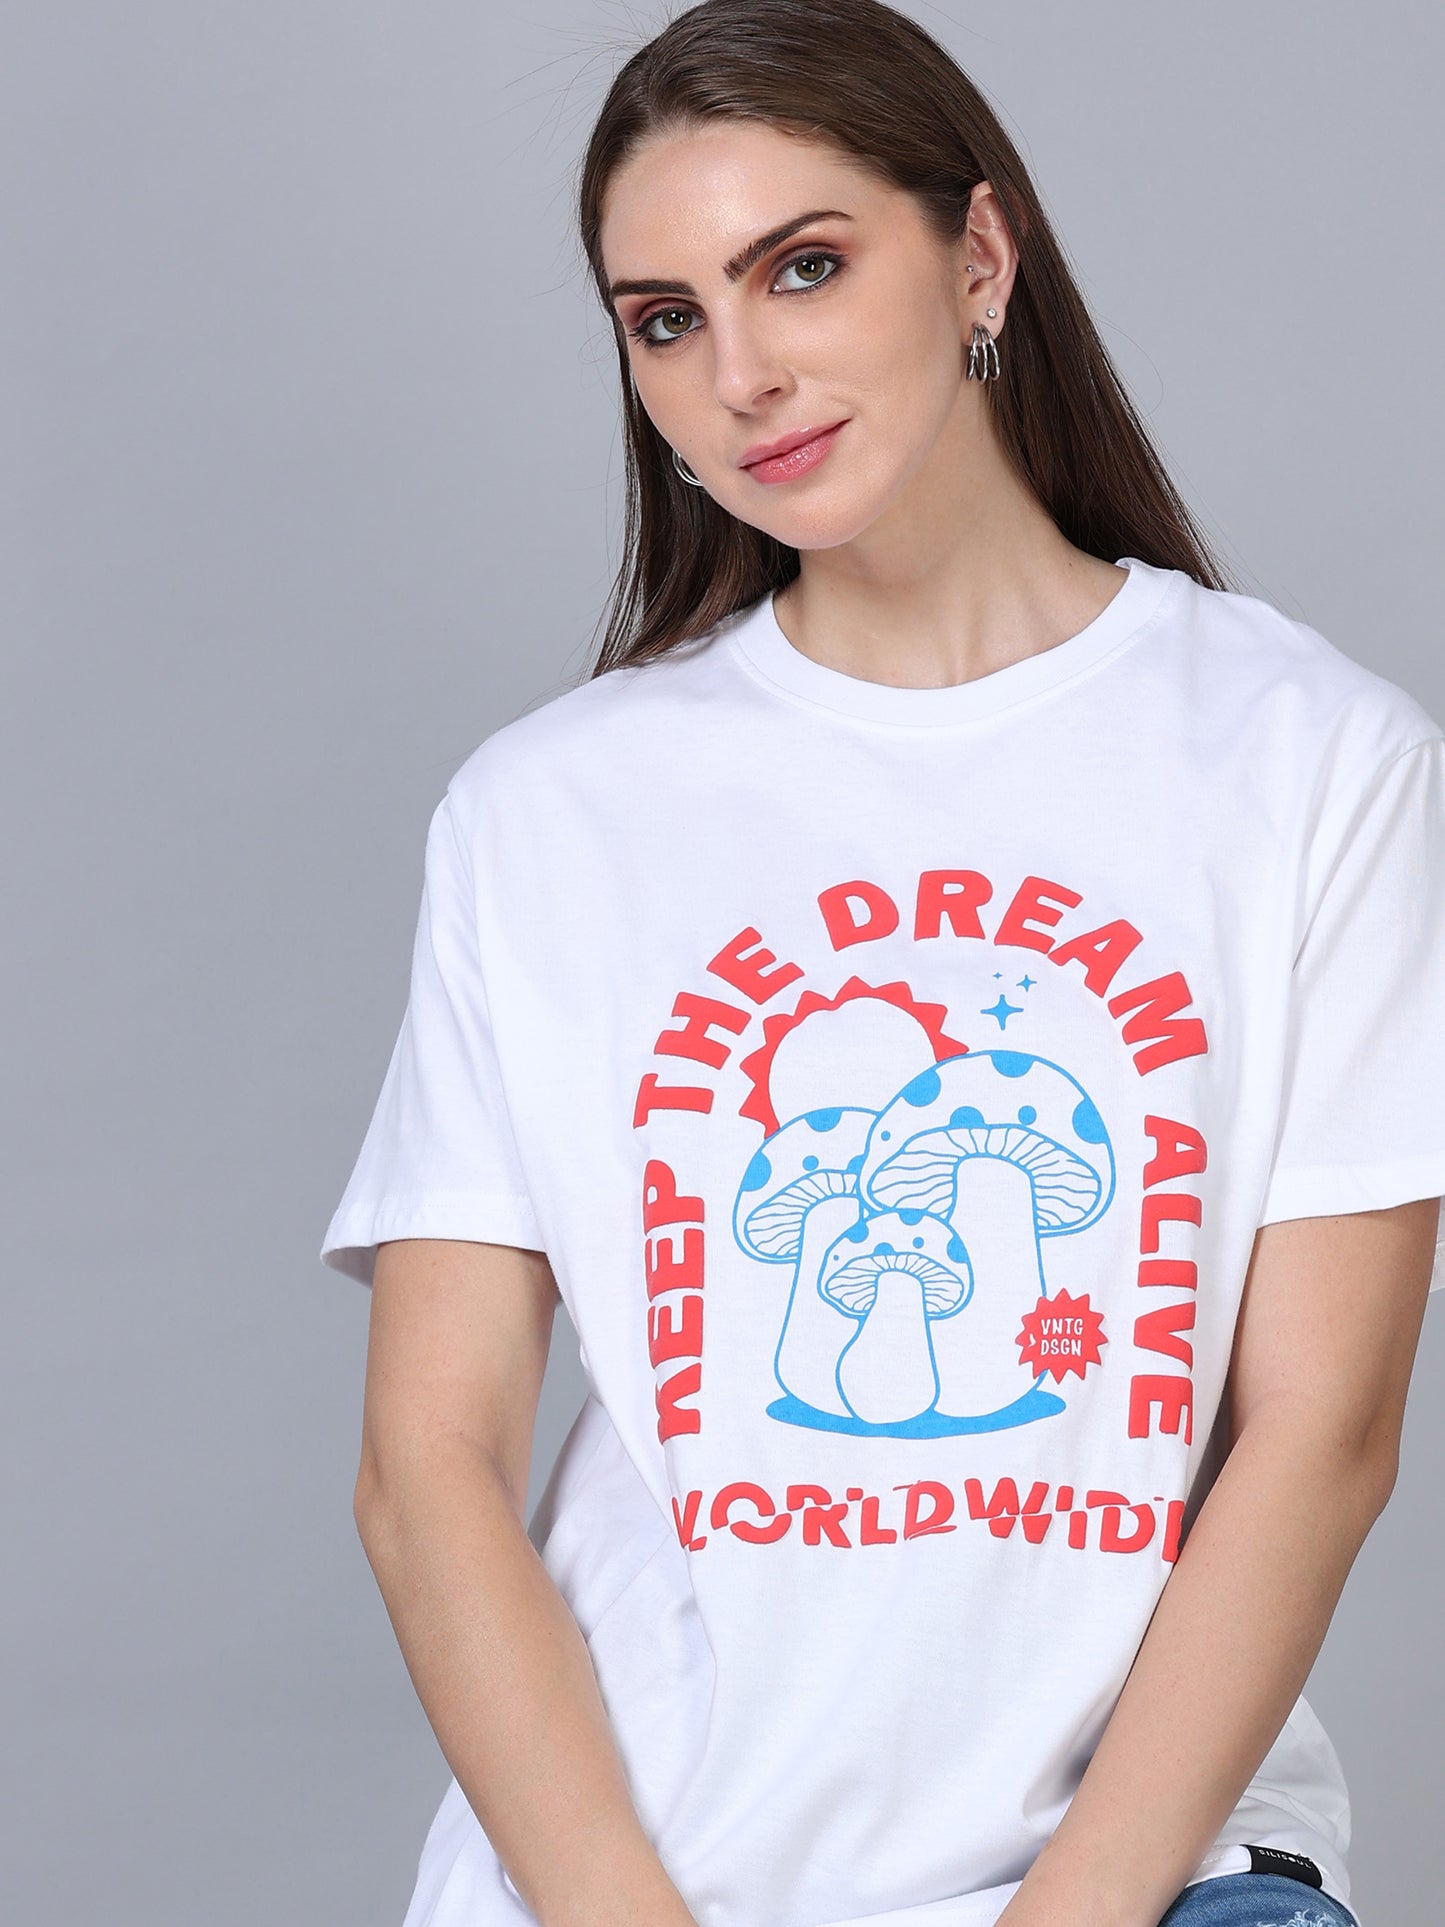 Women KEEP THE DREAMS ALIVE Printed Relaxed Fit T-Shirt